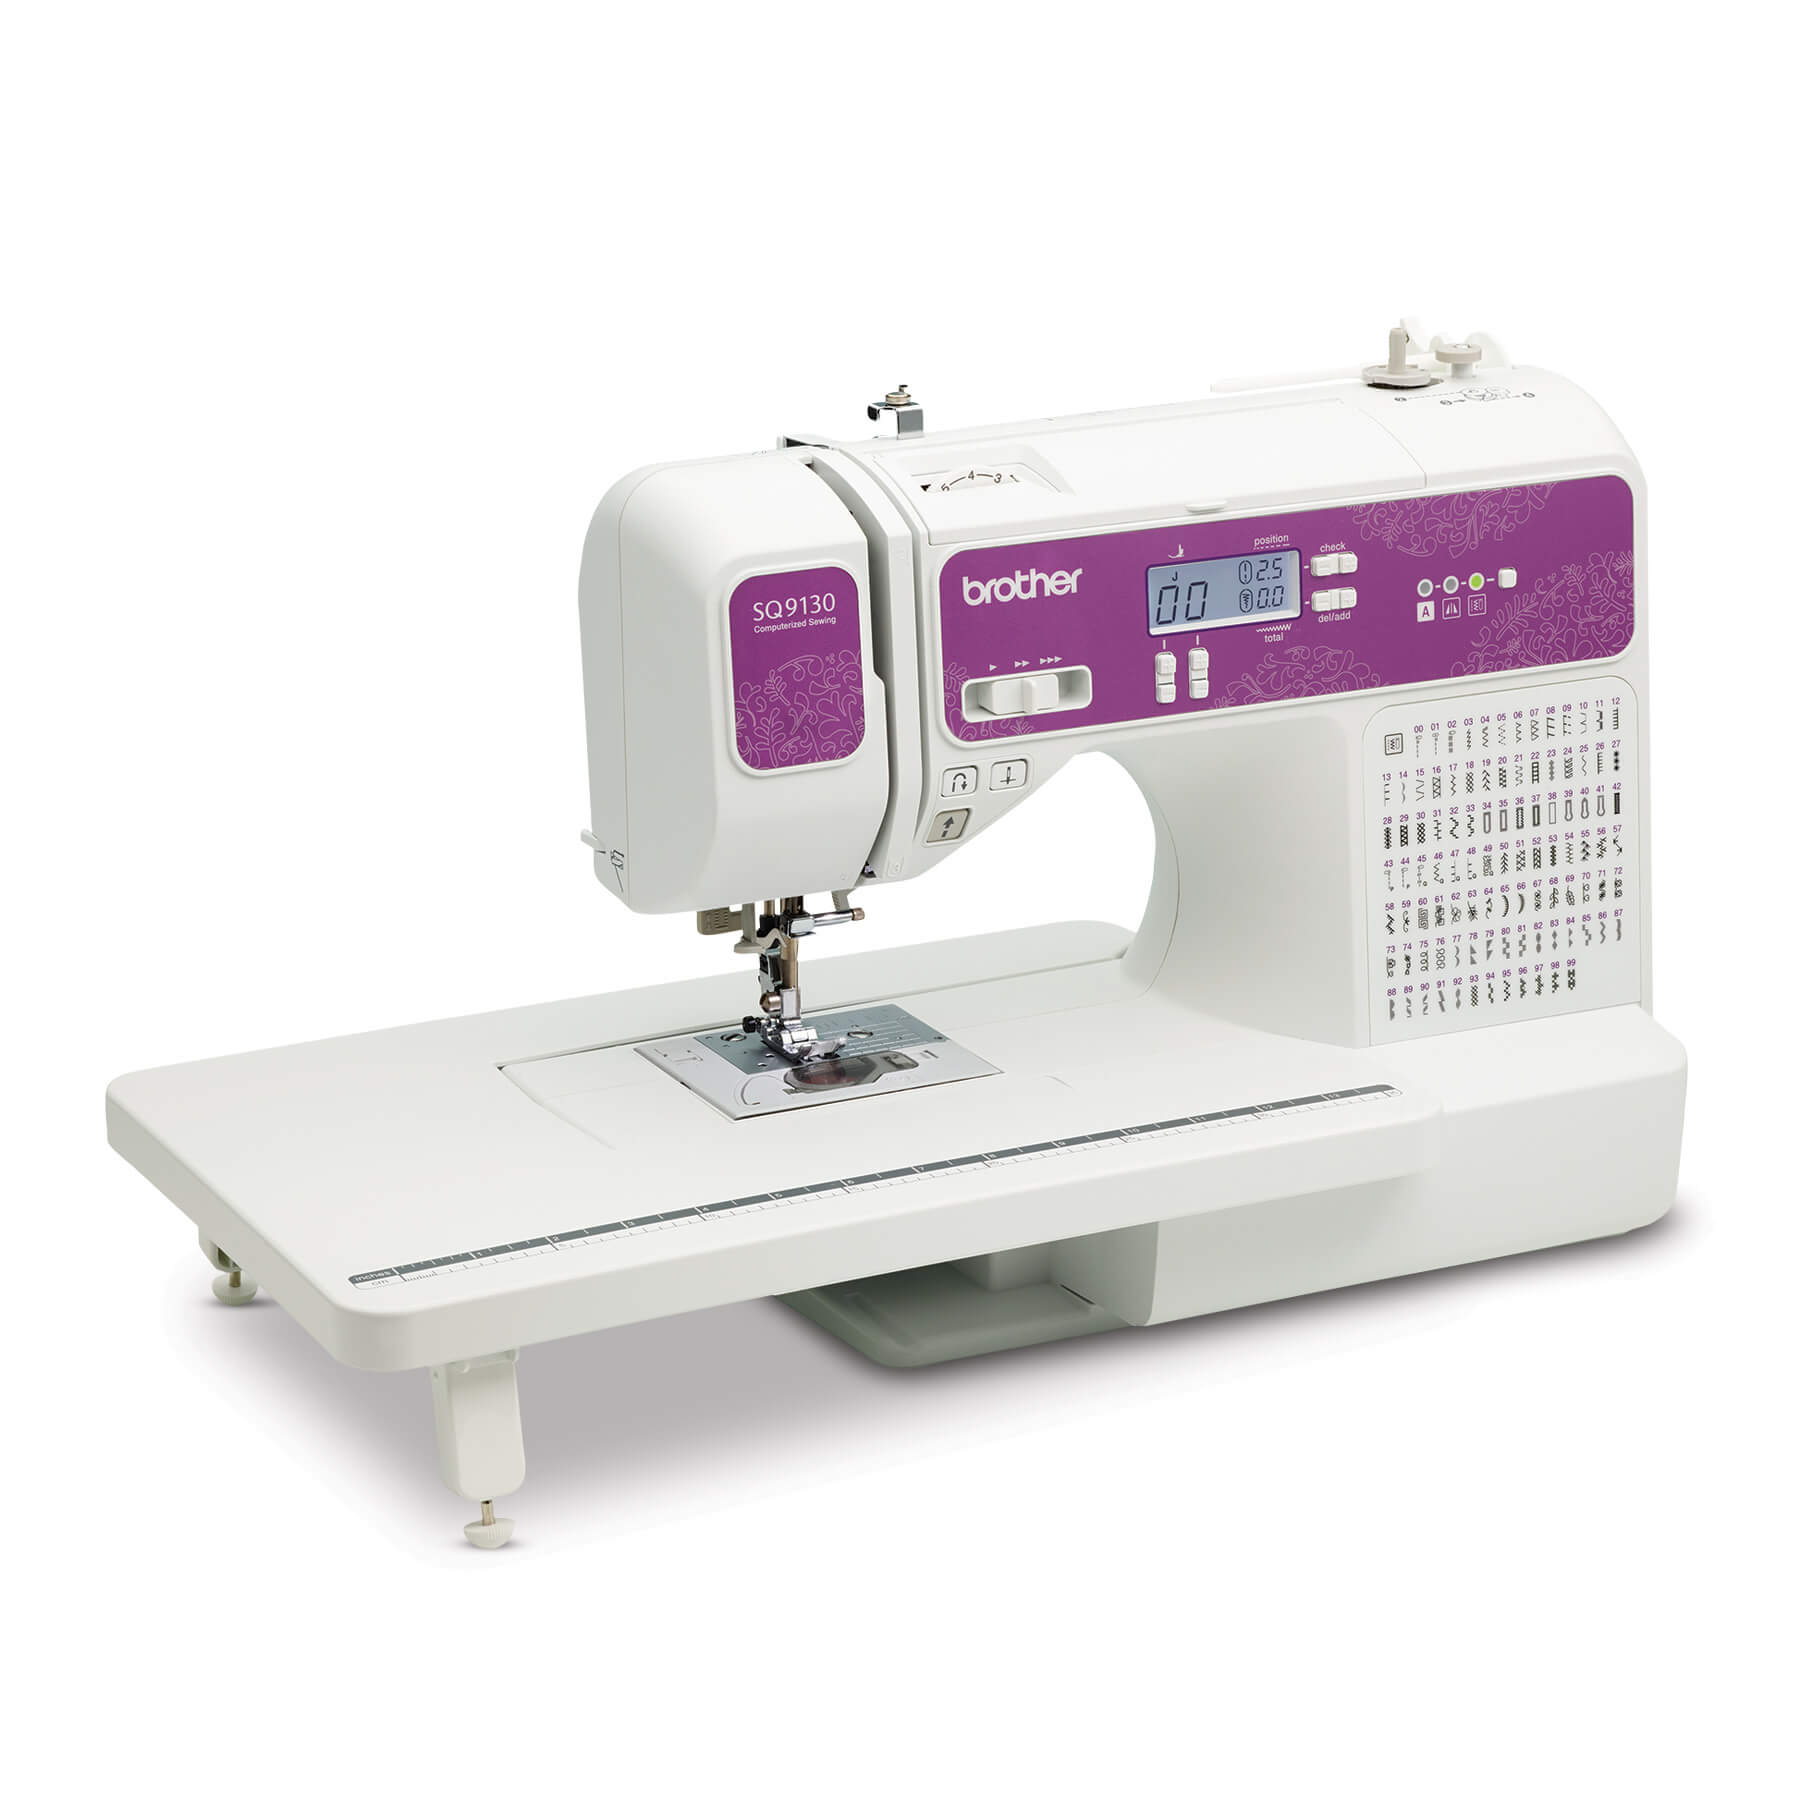 Image of Brother SQ9130 Computerized Sewing & Quilting Machine